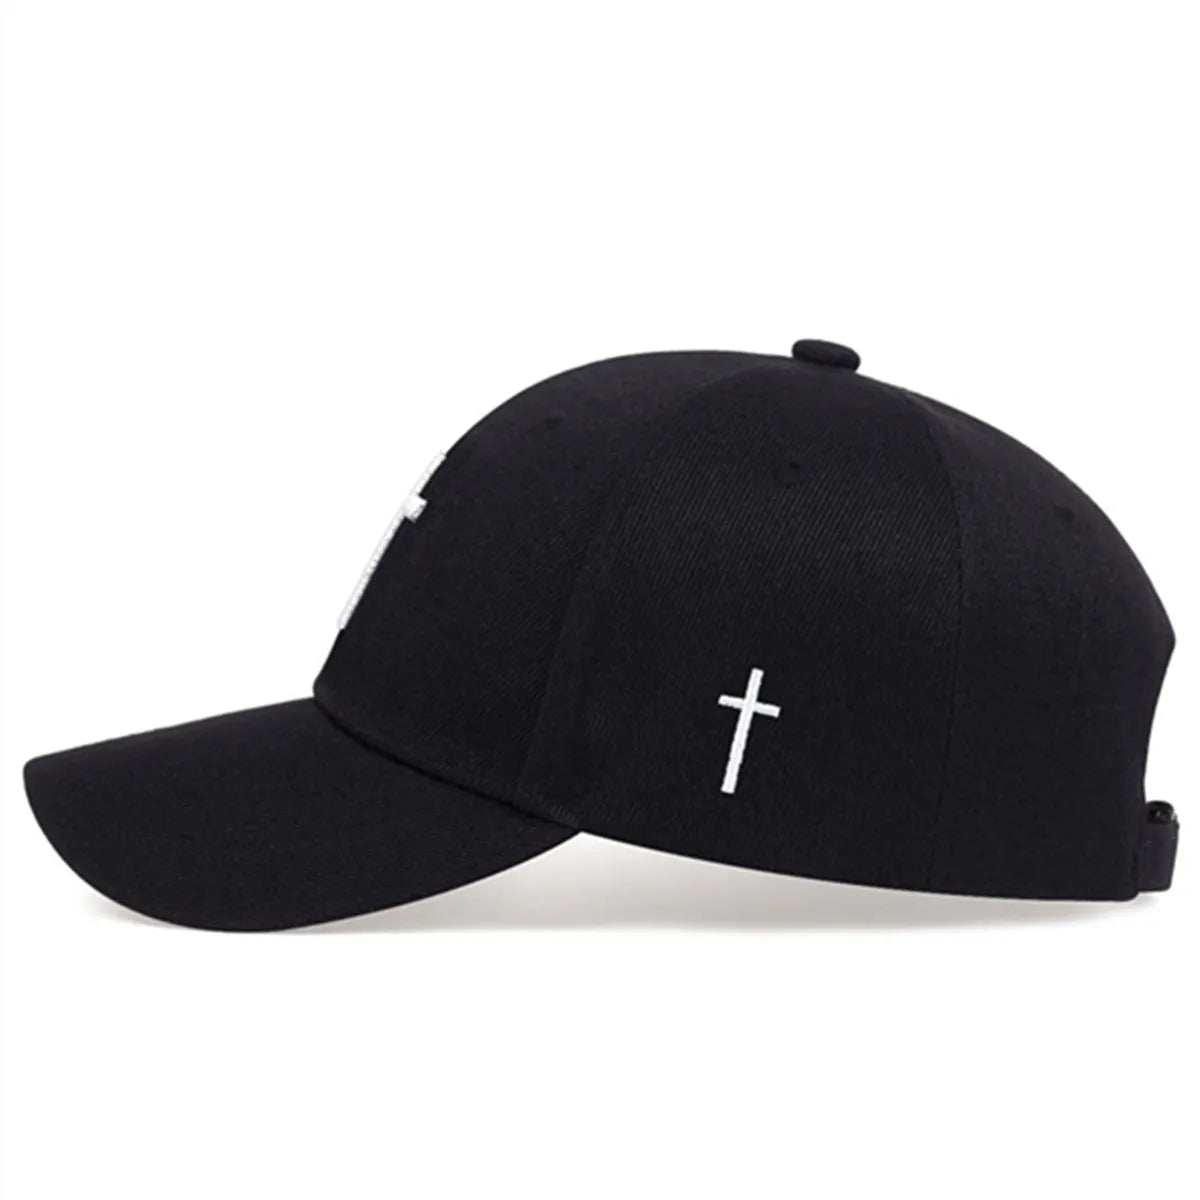 Simple Black Cotton Snapback Golf Hat for Men and Women